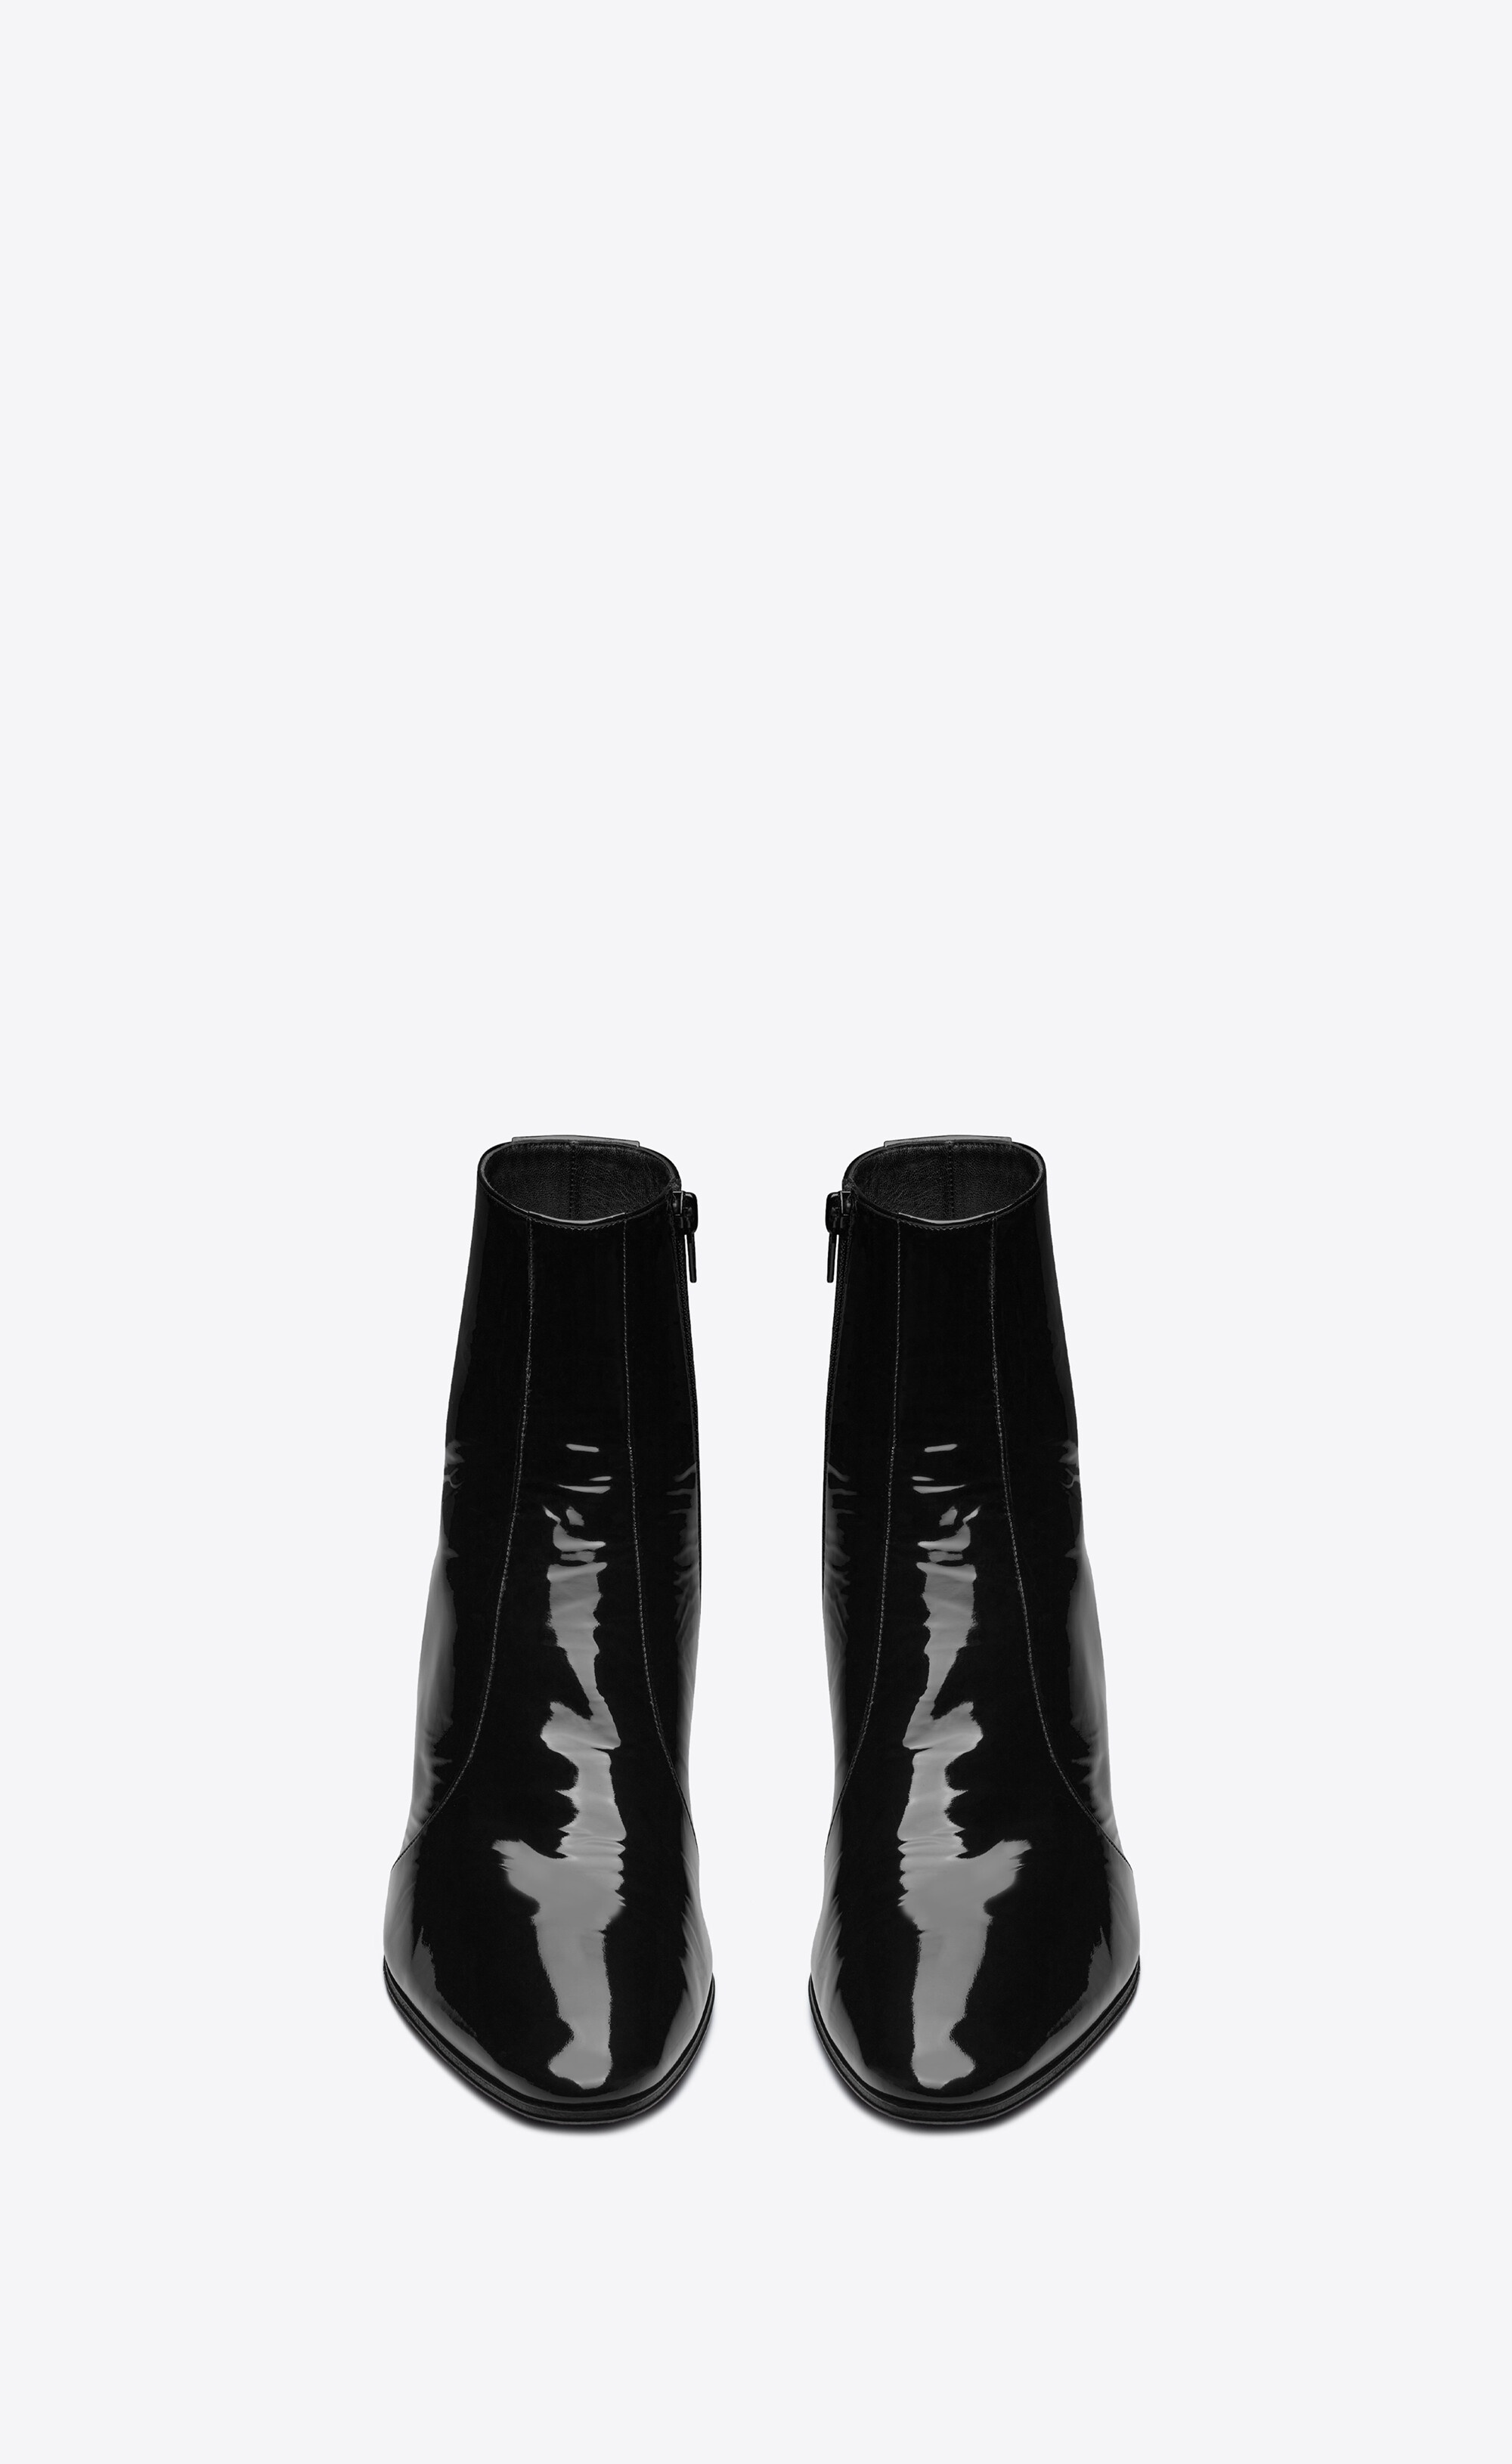 vassili zipped boots in patent leather - 2